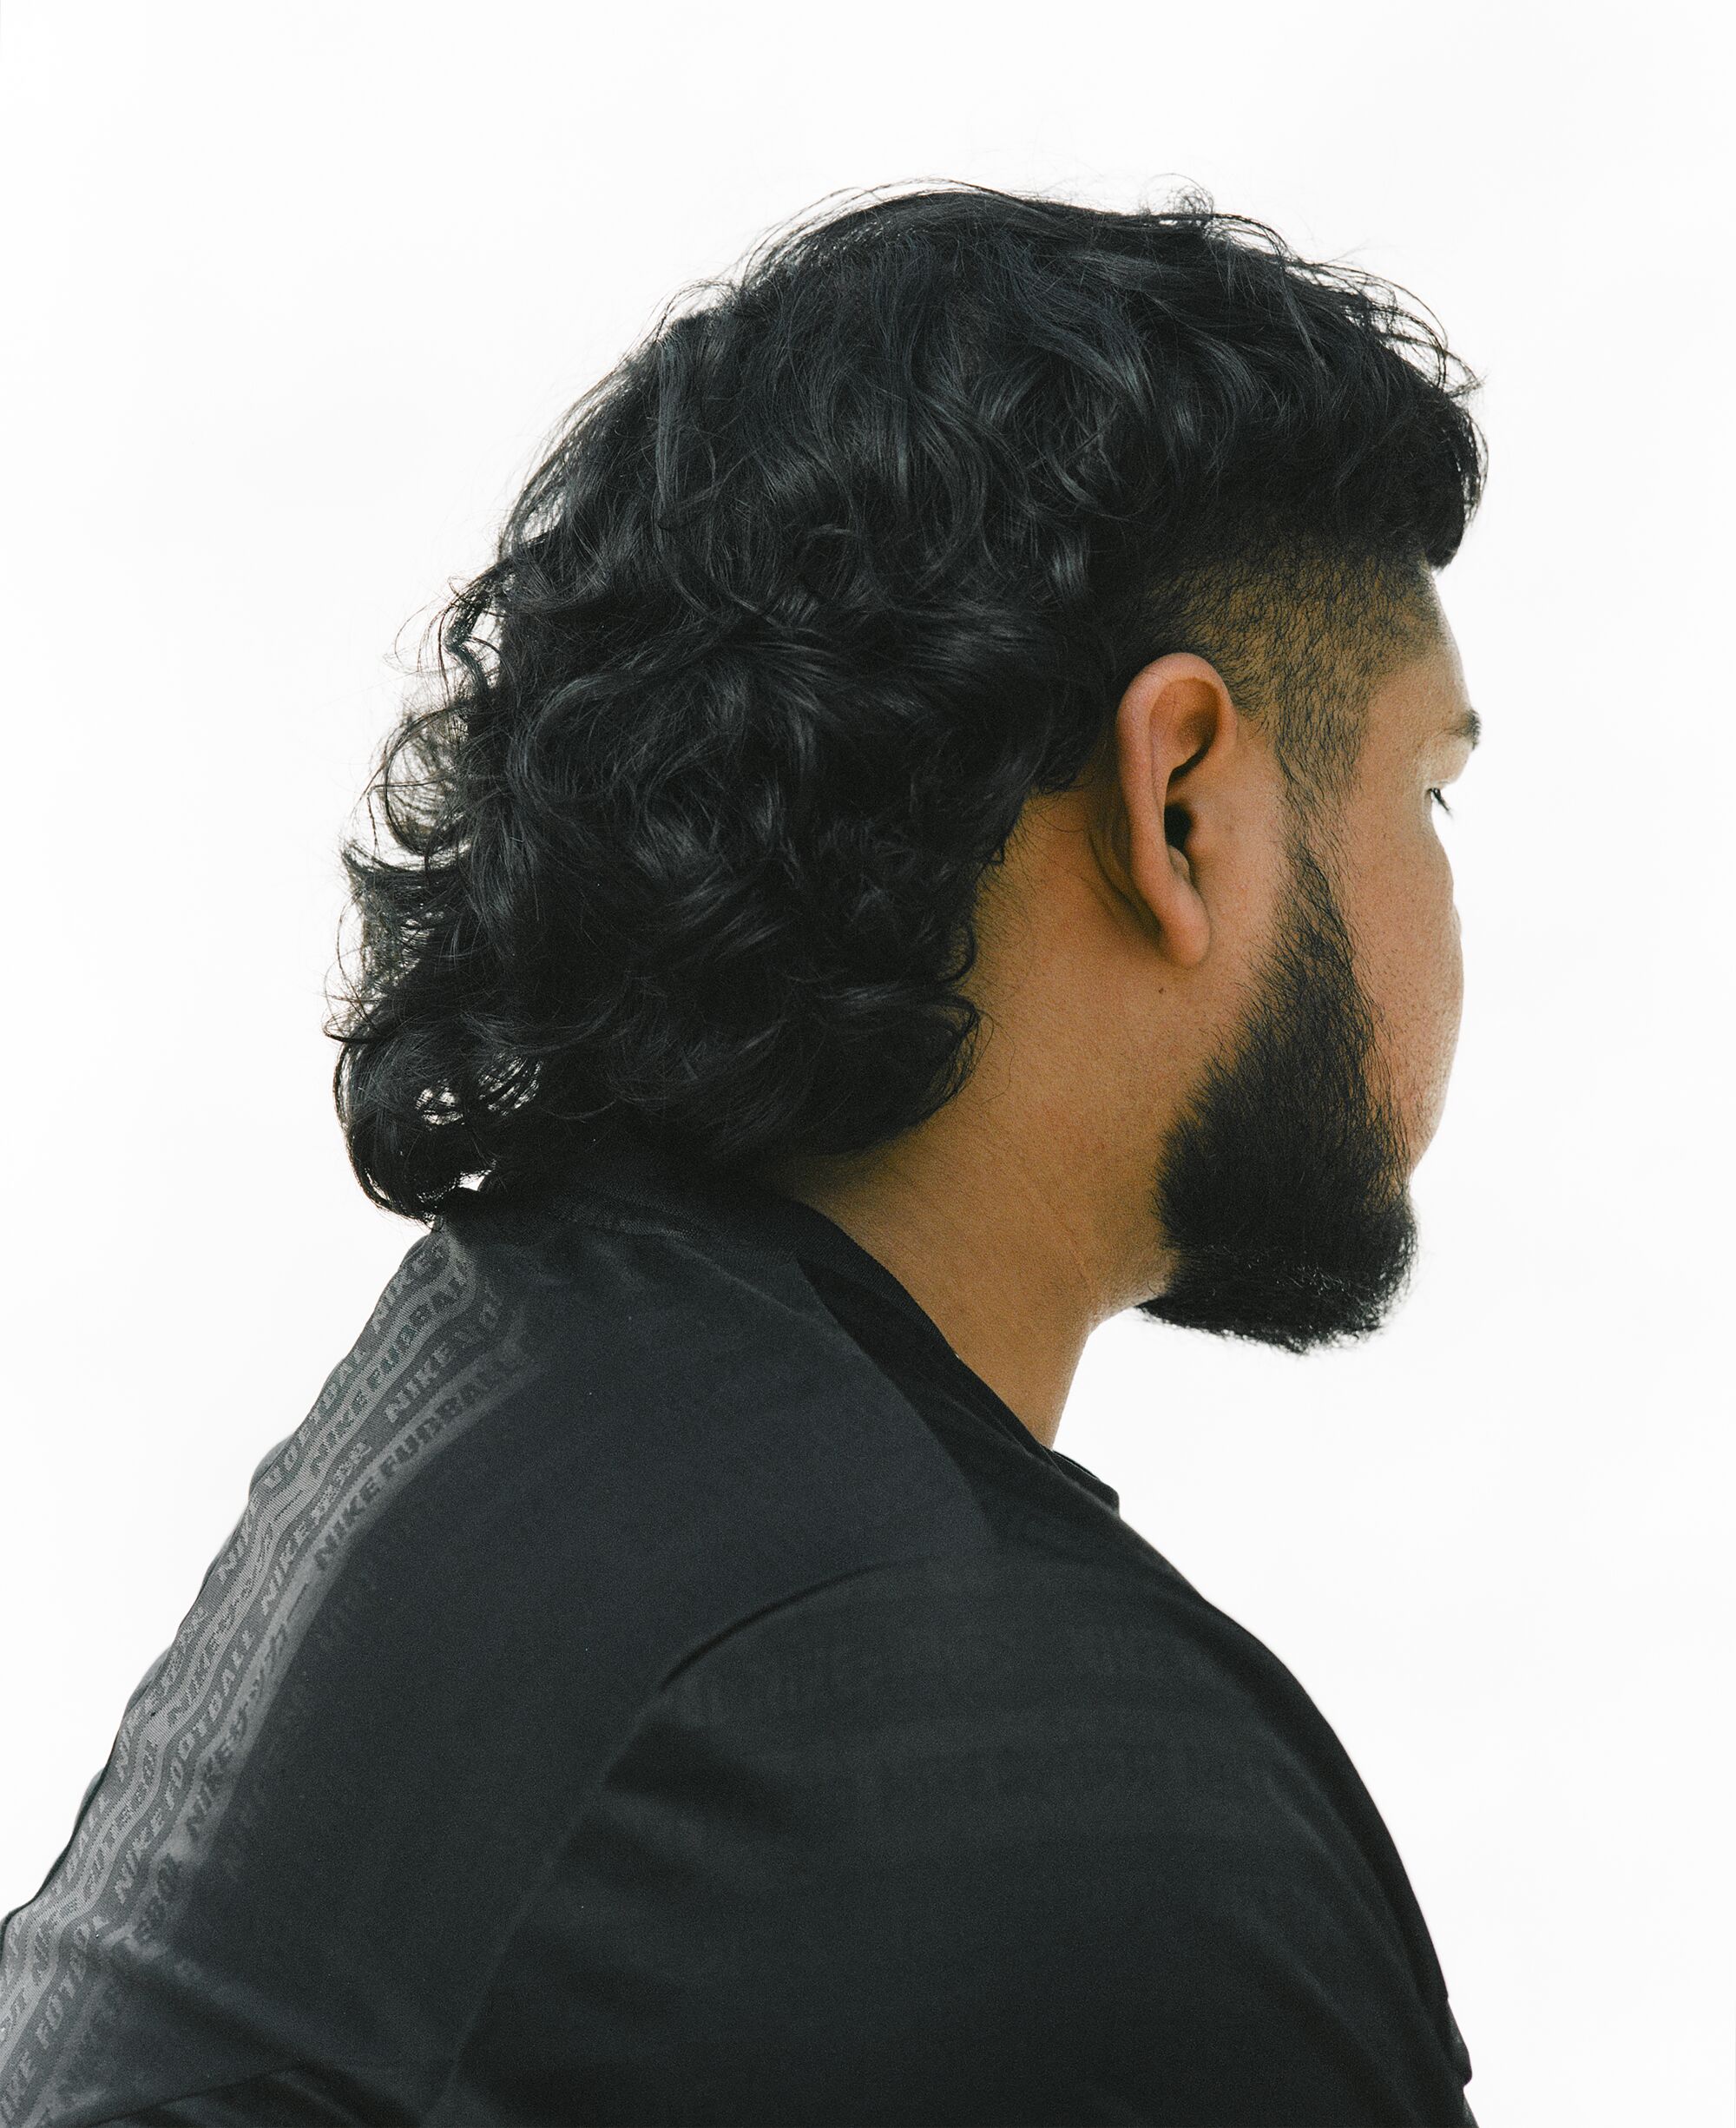 Photo of a mullet seen from behind